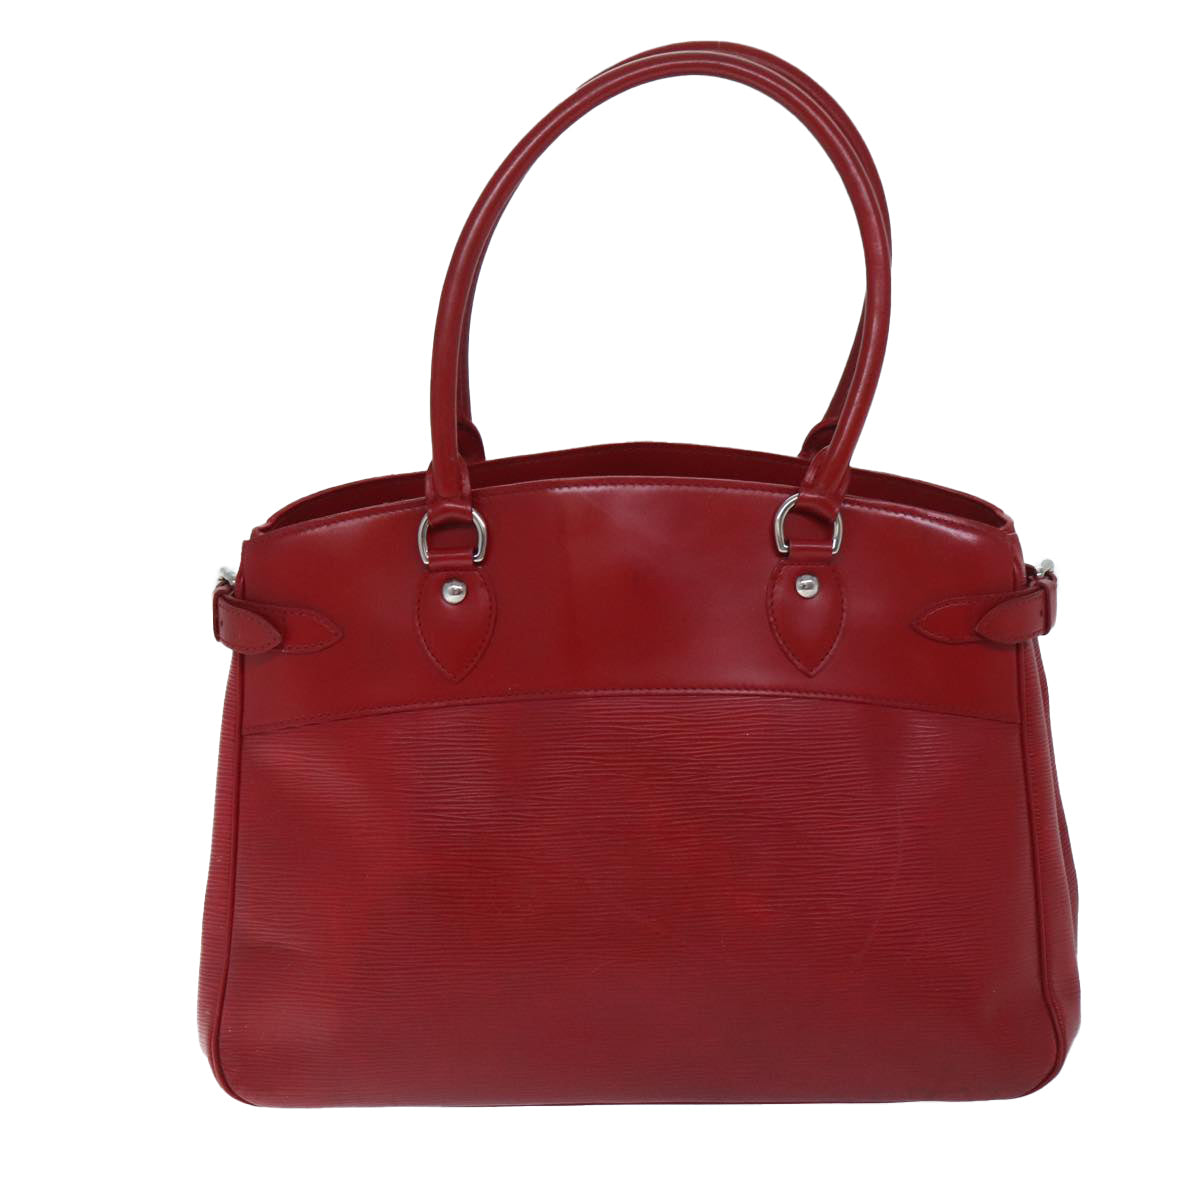 LOUIS VUITTON Epi Passy GM Hand Bag Red M59252 LV Auth bs13221 - 0